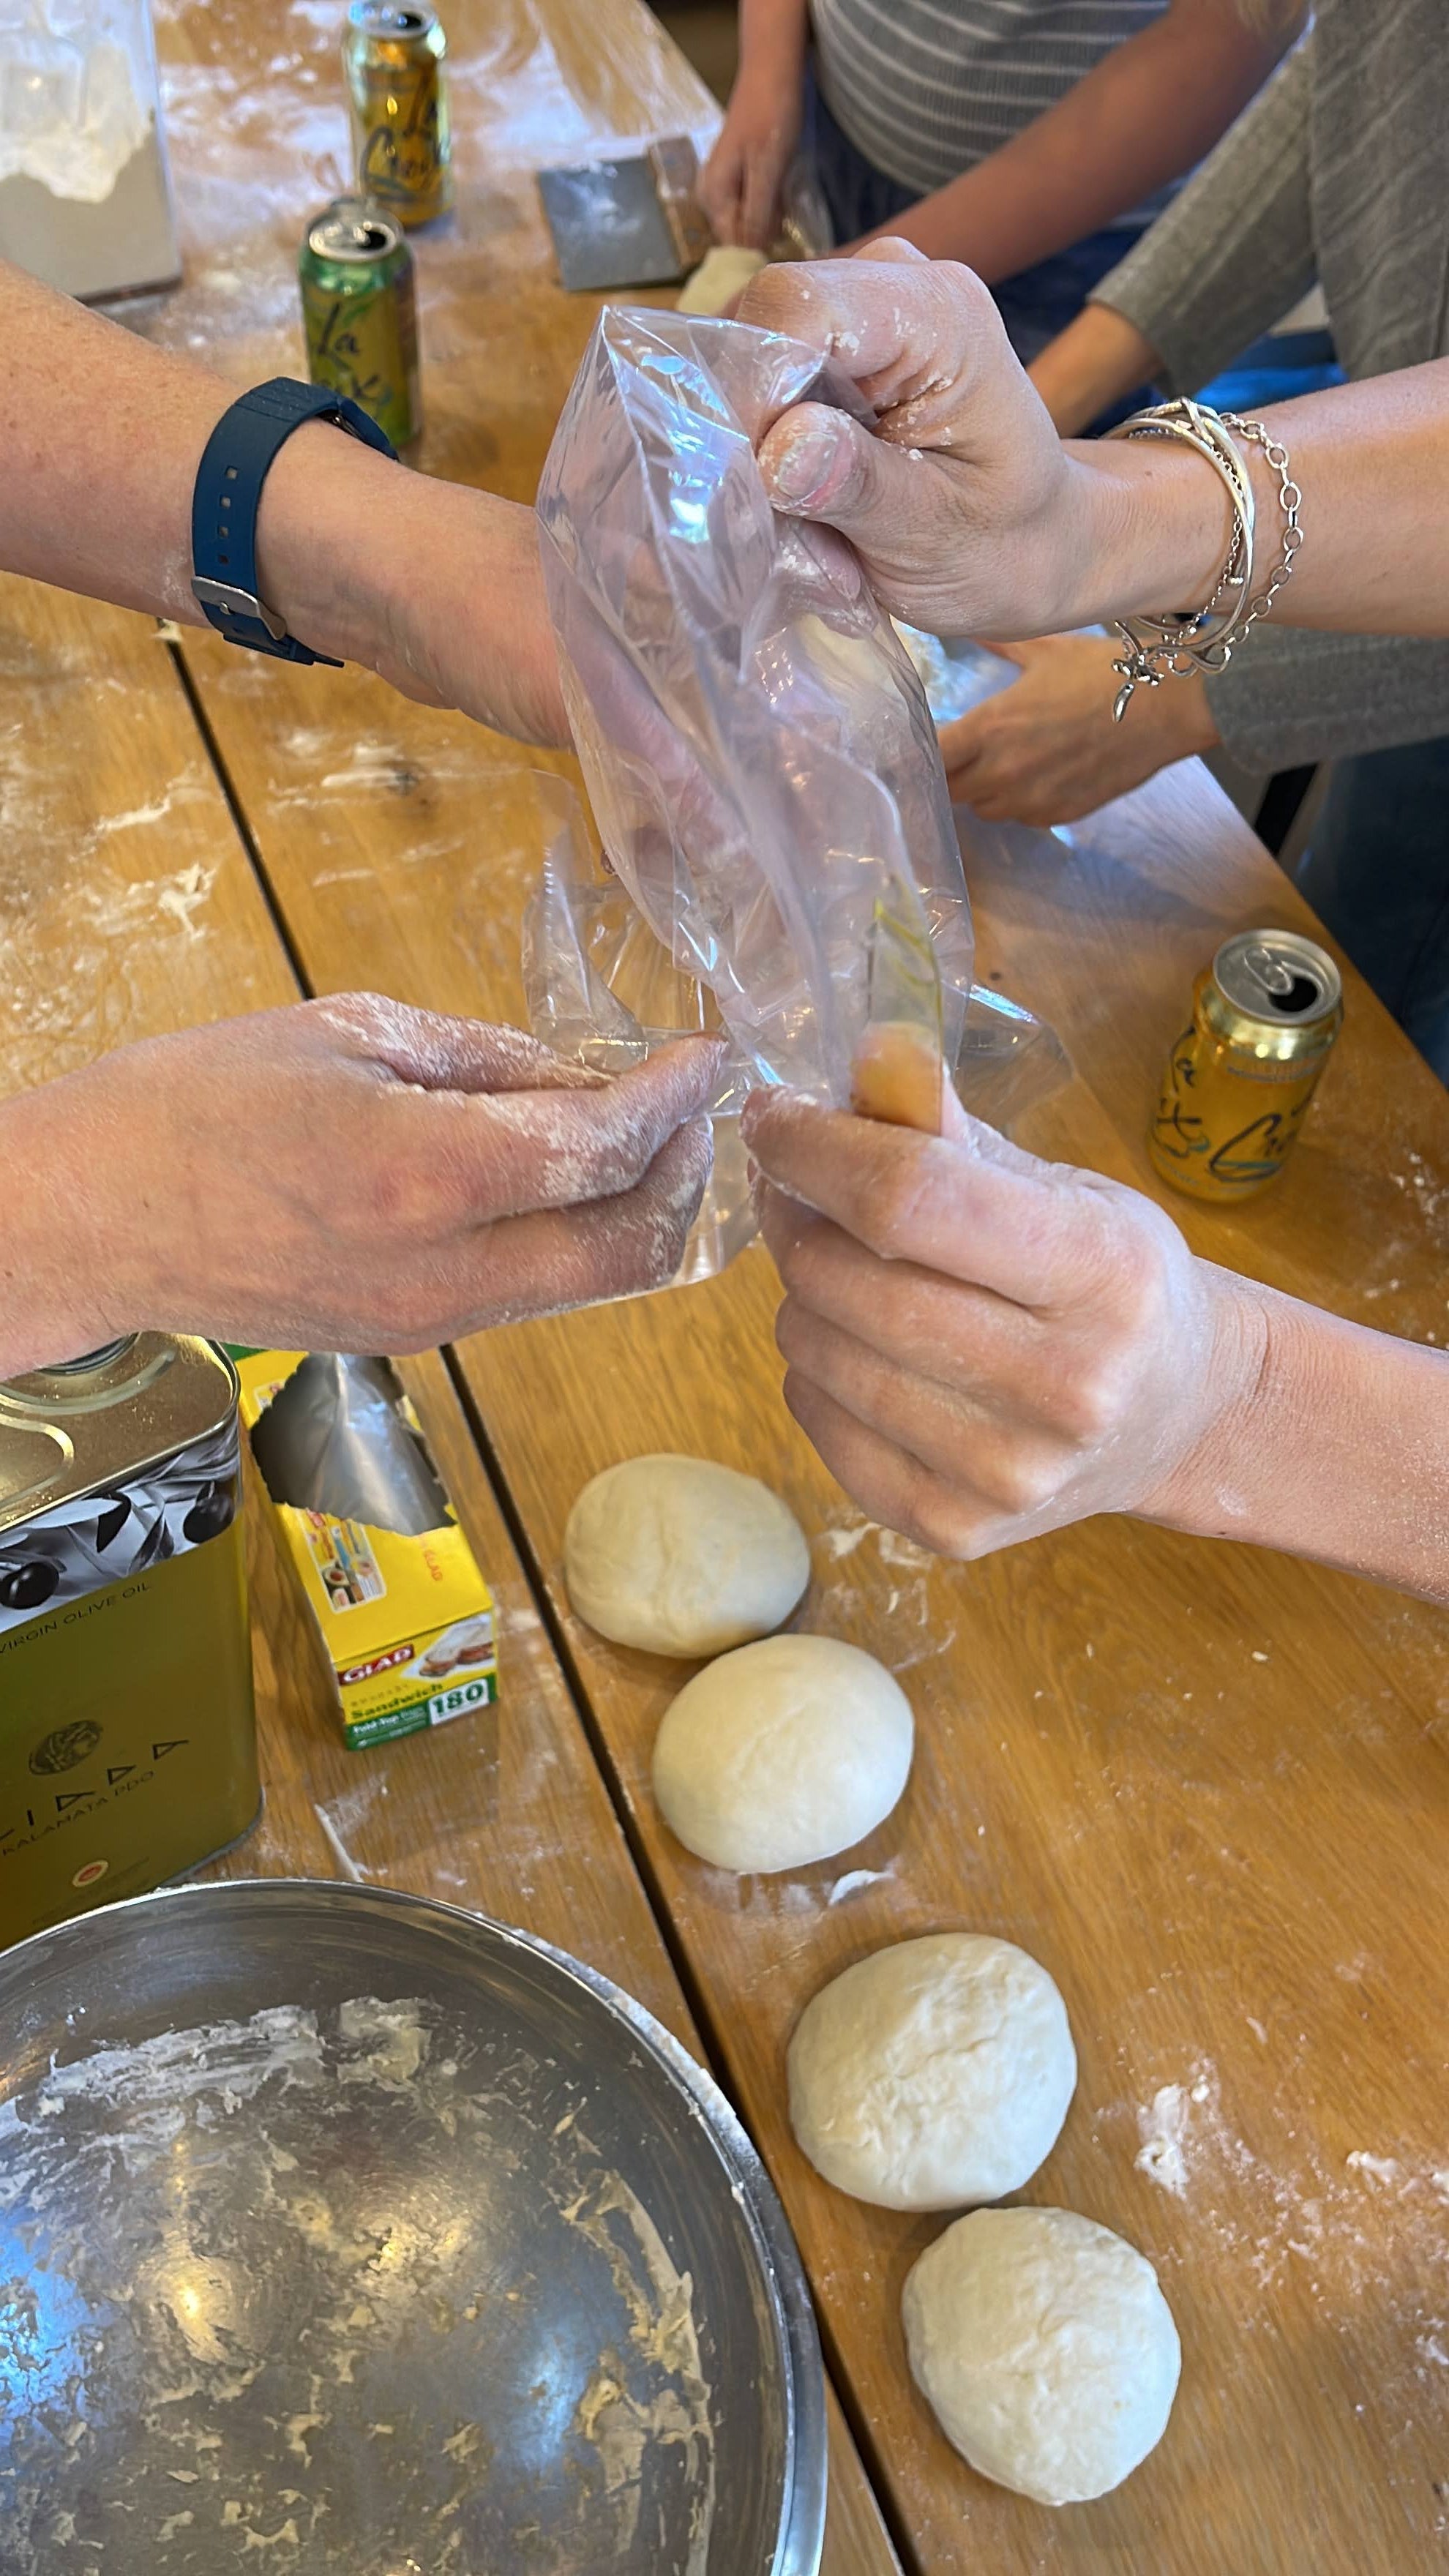 Place pizza dough balls into lightly greased bag or container